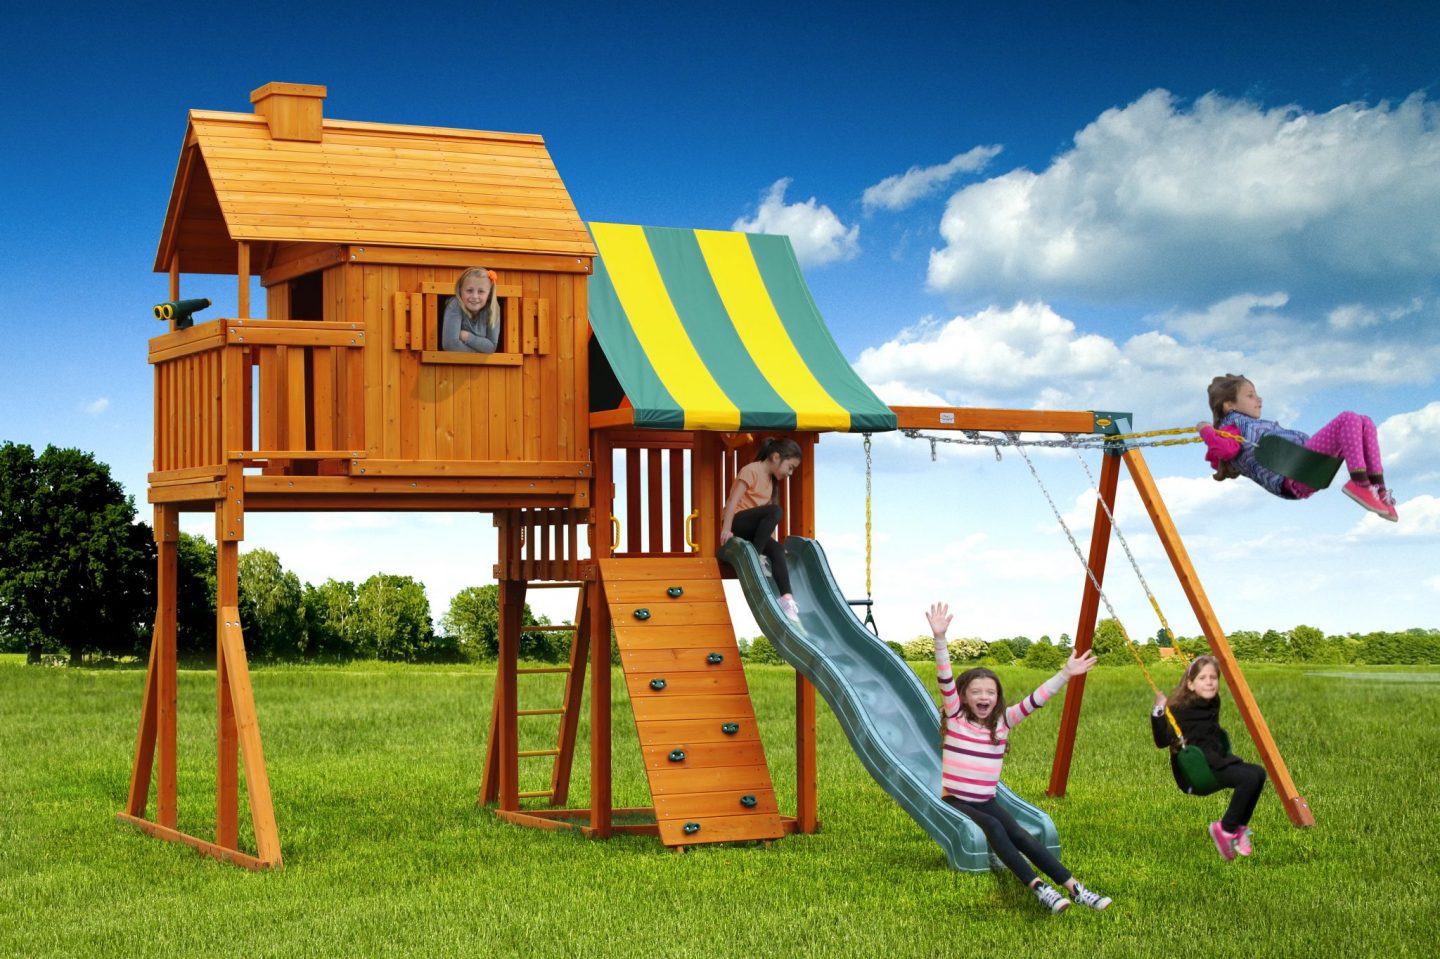 Few Reasons to Build a Play Set in the Backyard